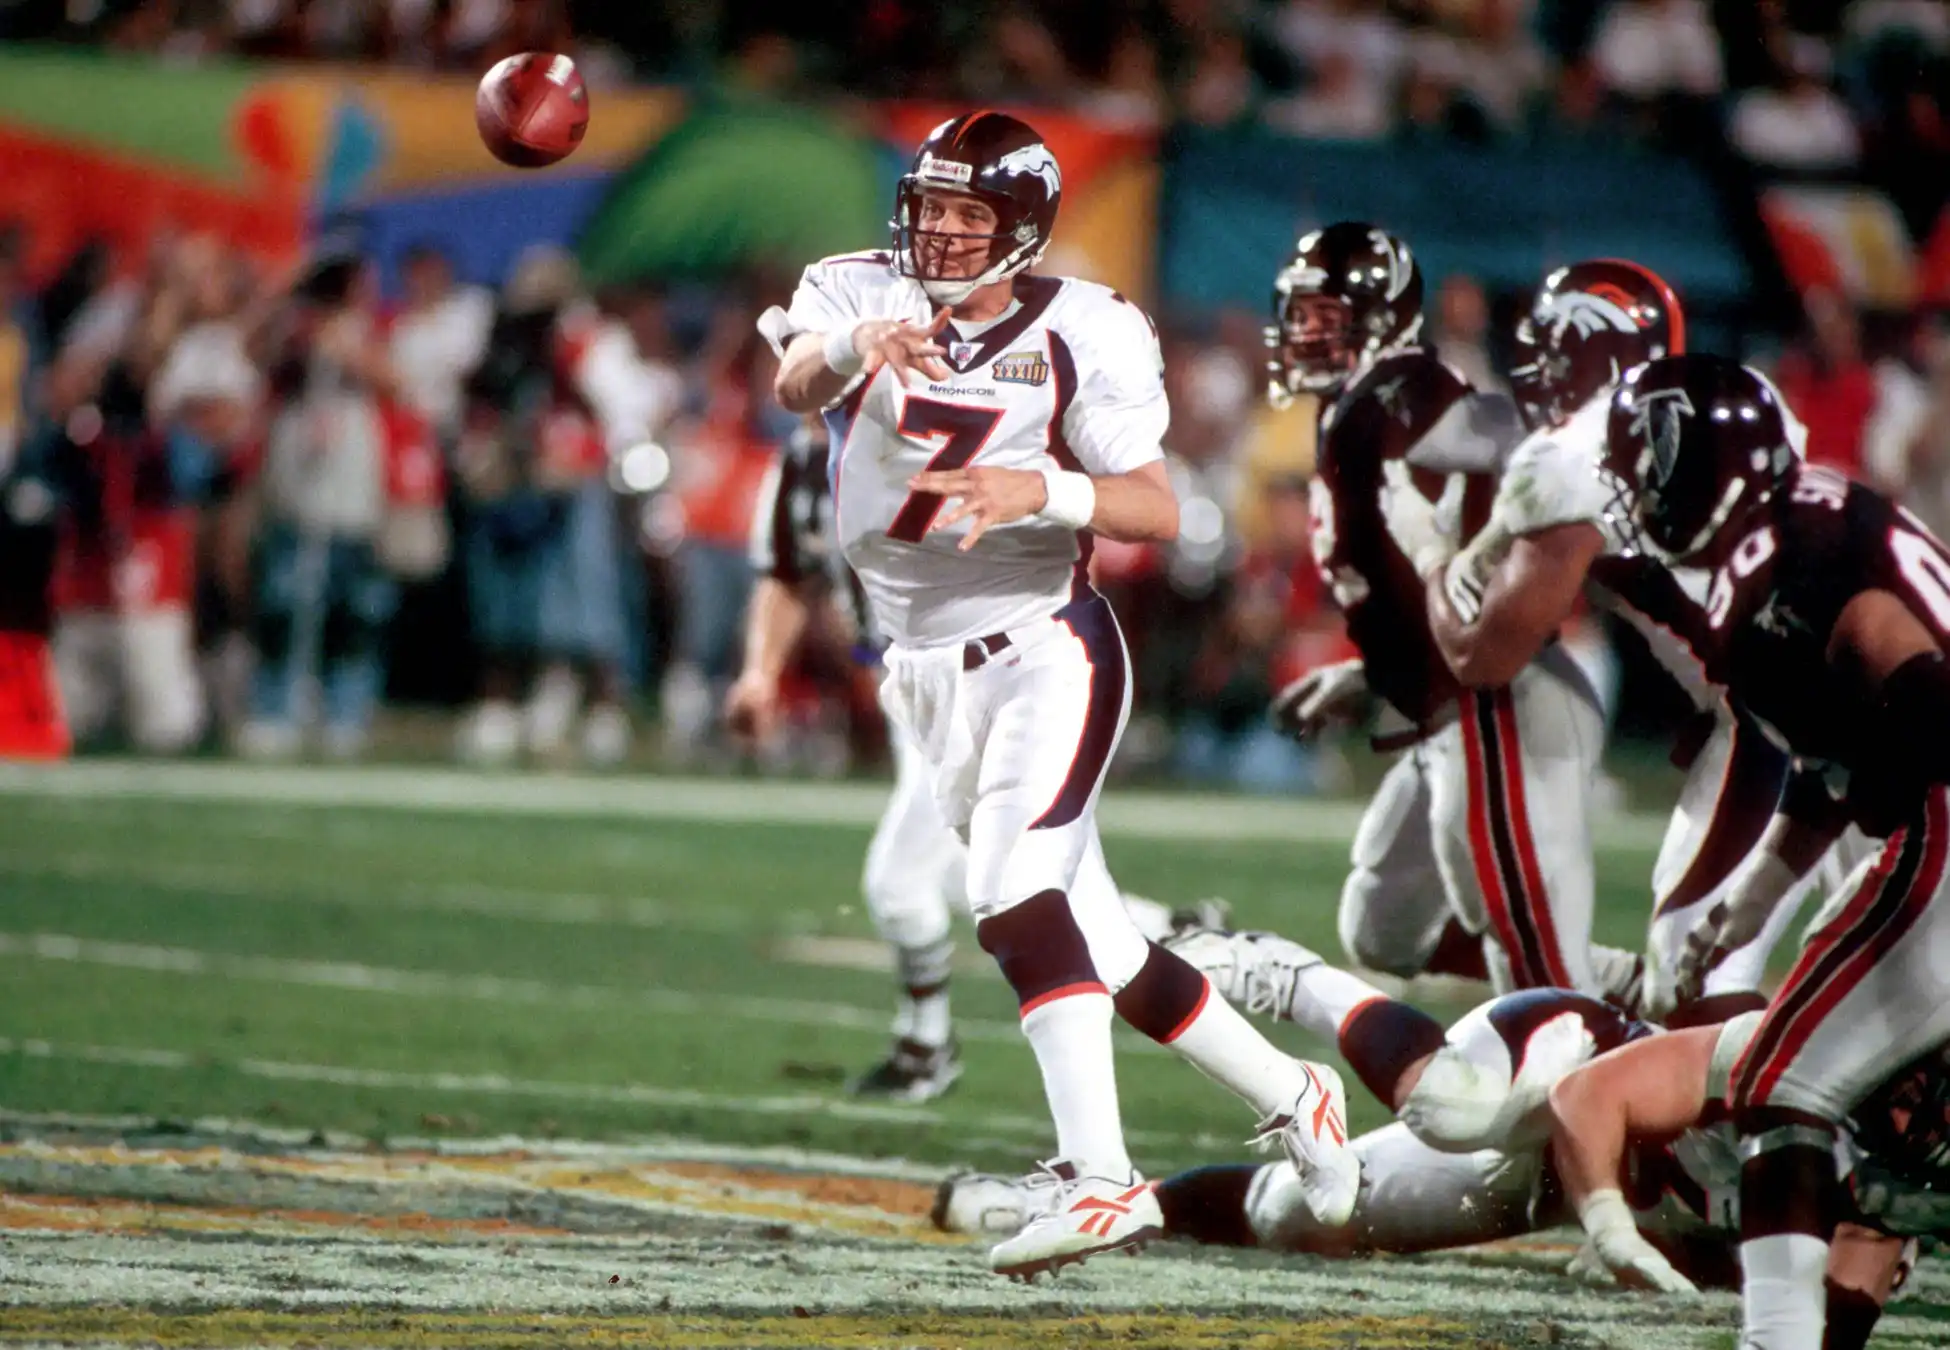 Jan 31, 1999; Miami, FL, USA; FILE PHOTO; Denver Broncos quarterback (7) JOHN ELWAY in action against the Atlanta Falcons during Super Bowl XXXIII at Pro Player Stadium. Elway passed for 336 yards and ran for 1 touchdown as the Broncos defeated the Falcons 34-19 to earn back to back Super Bowl Titles. 